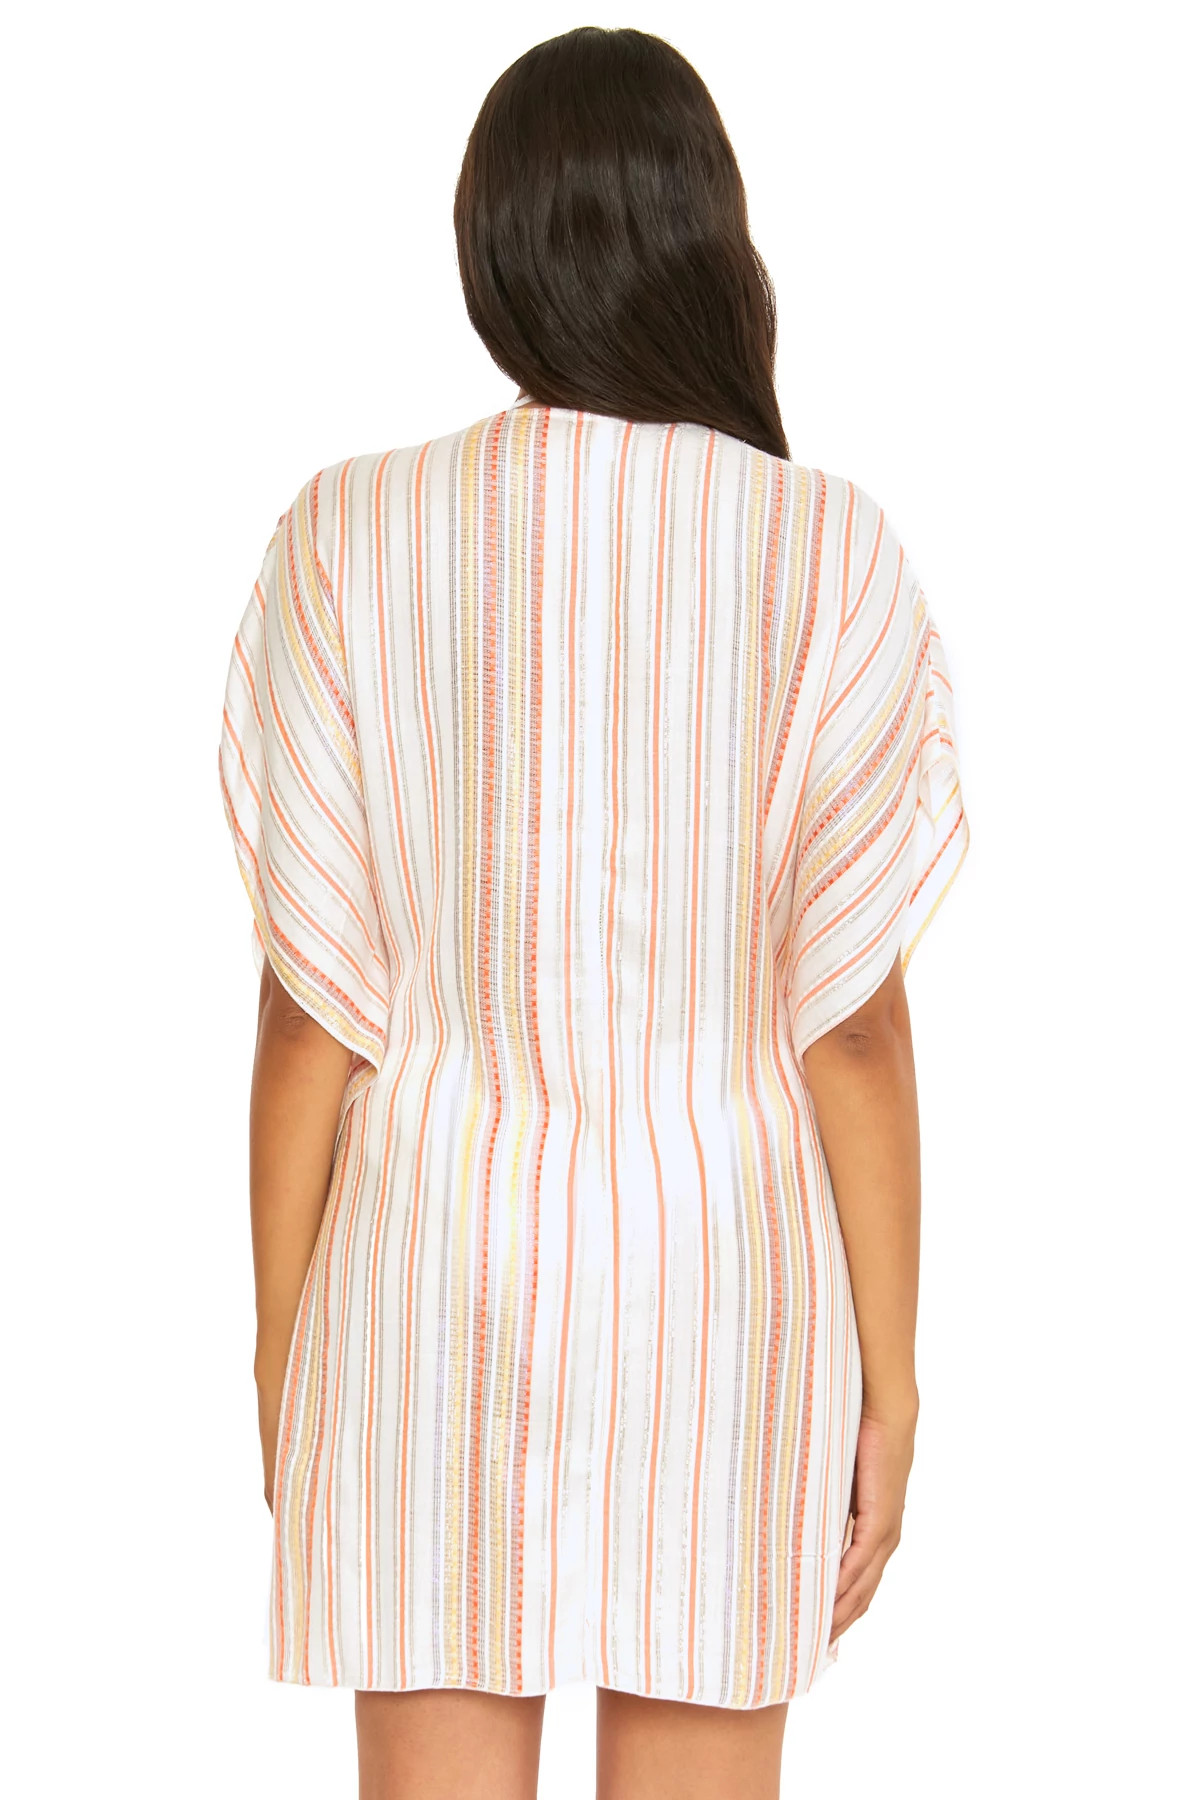 CORAL REEF Radiance Stripe Tunic image number 2